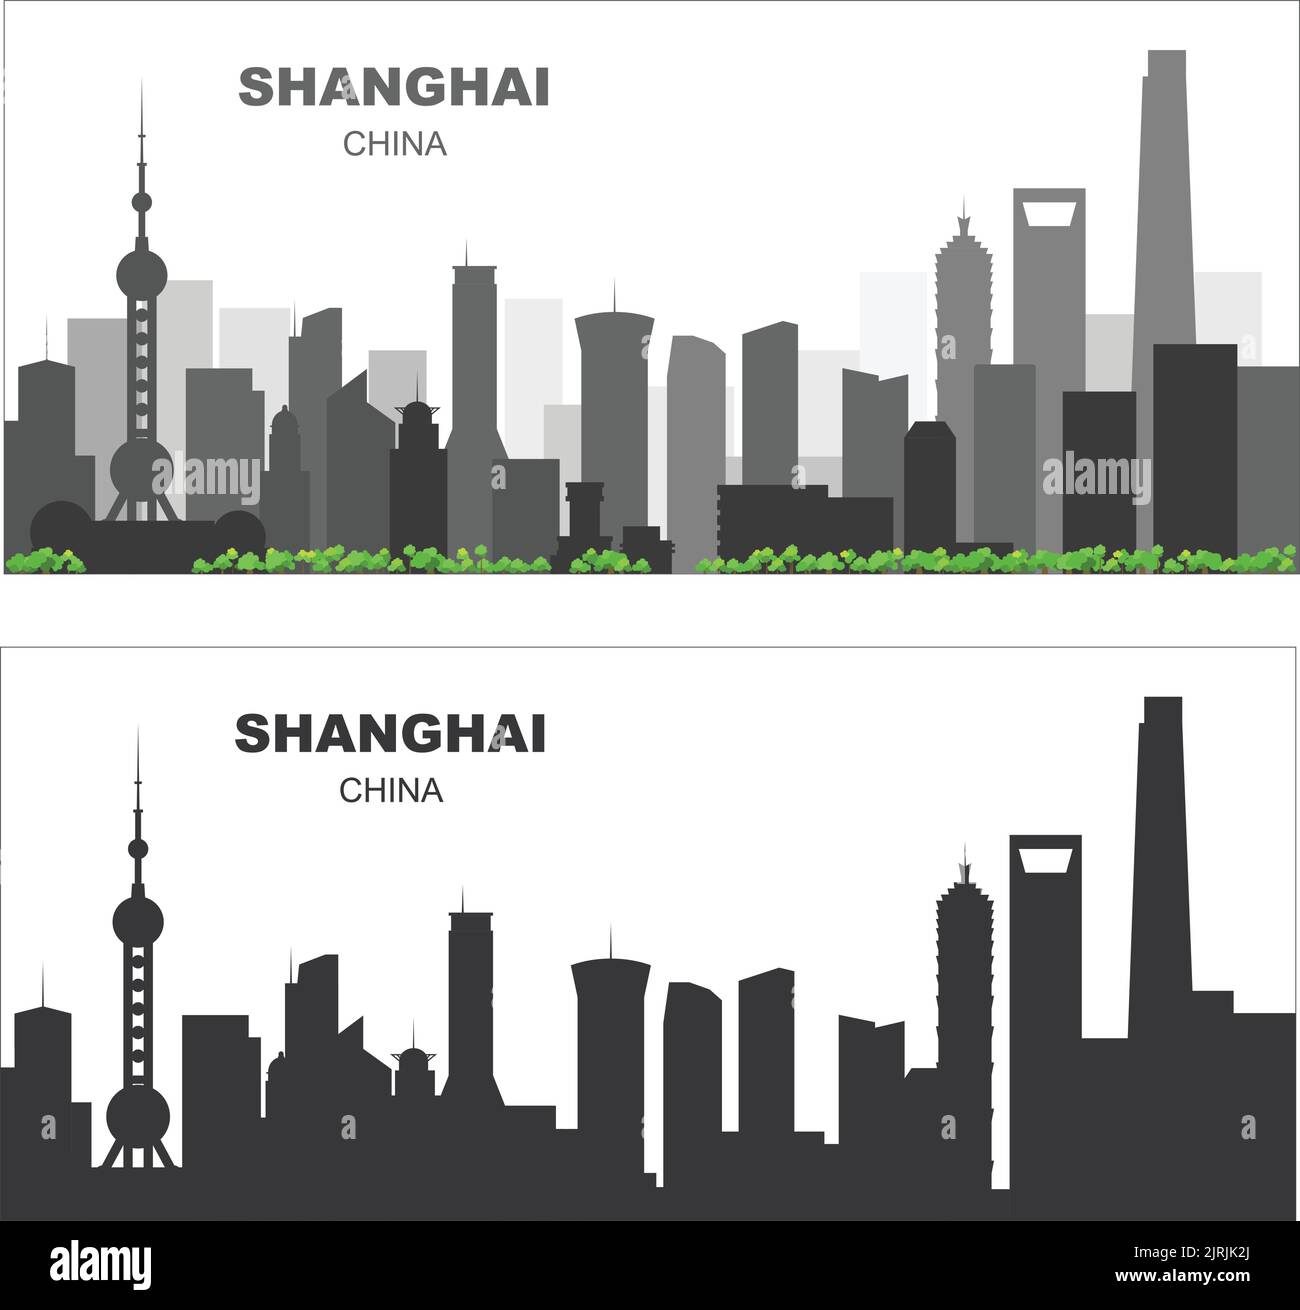 Layered editable vector illustration sihouette of Shanghai,China, each building is on a separate layer Stock Vector